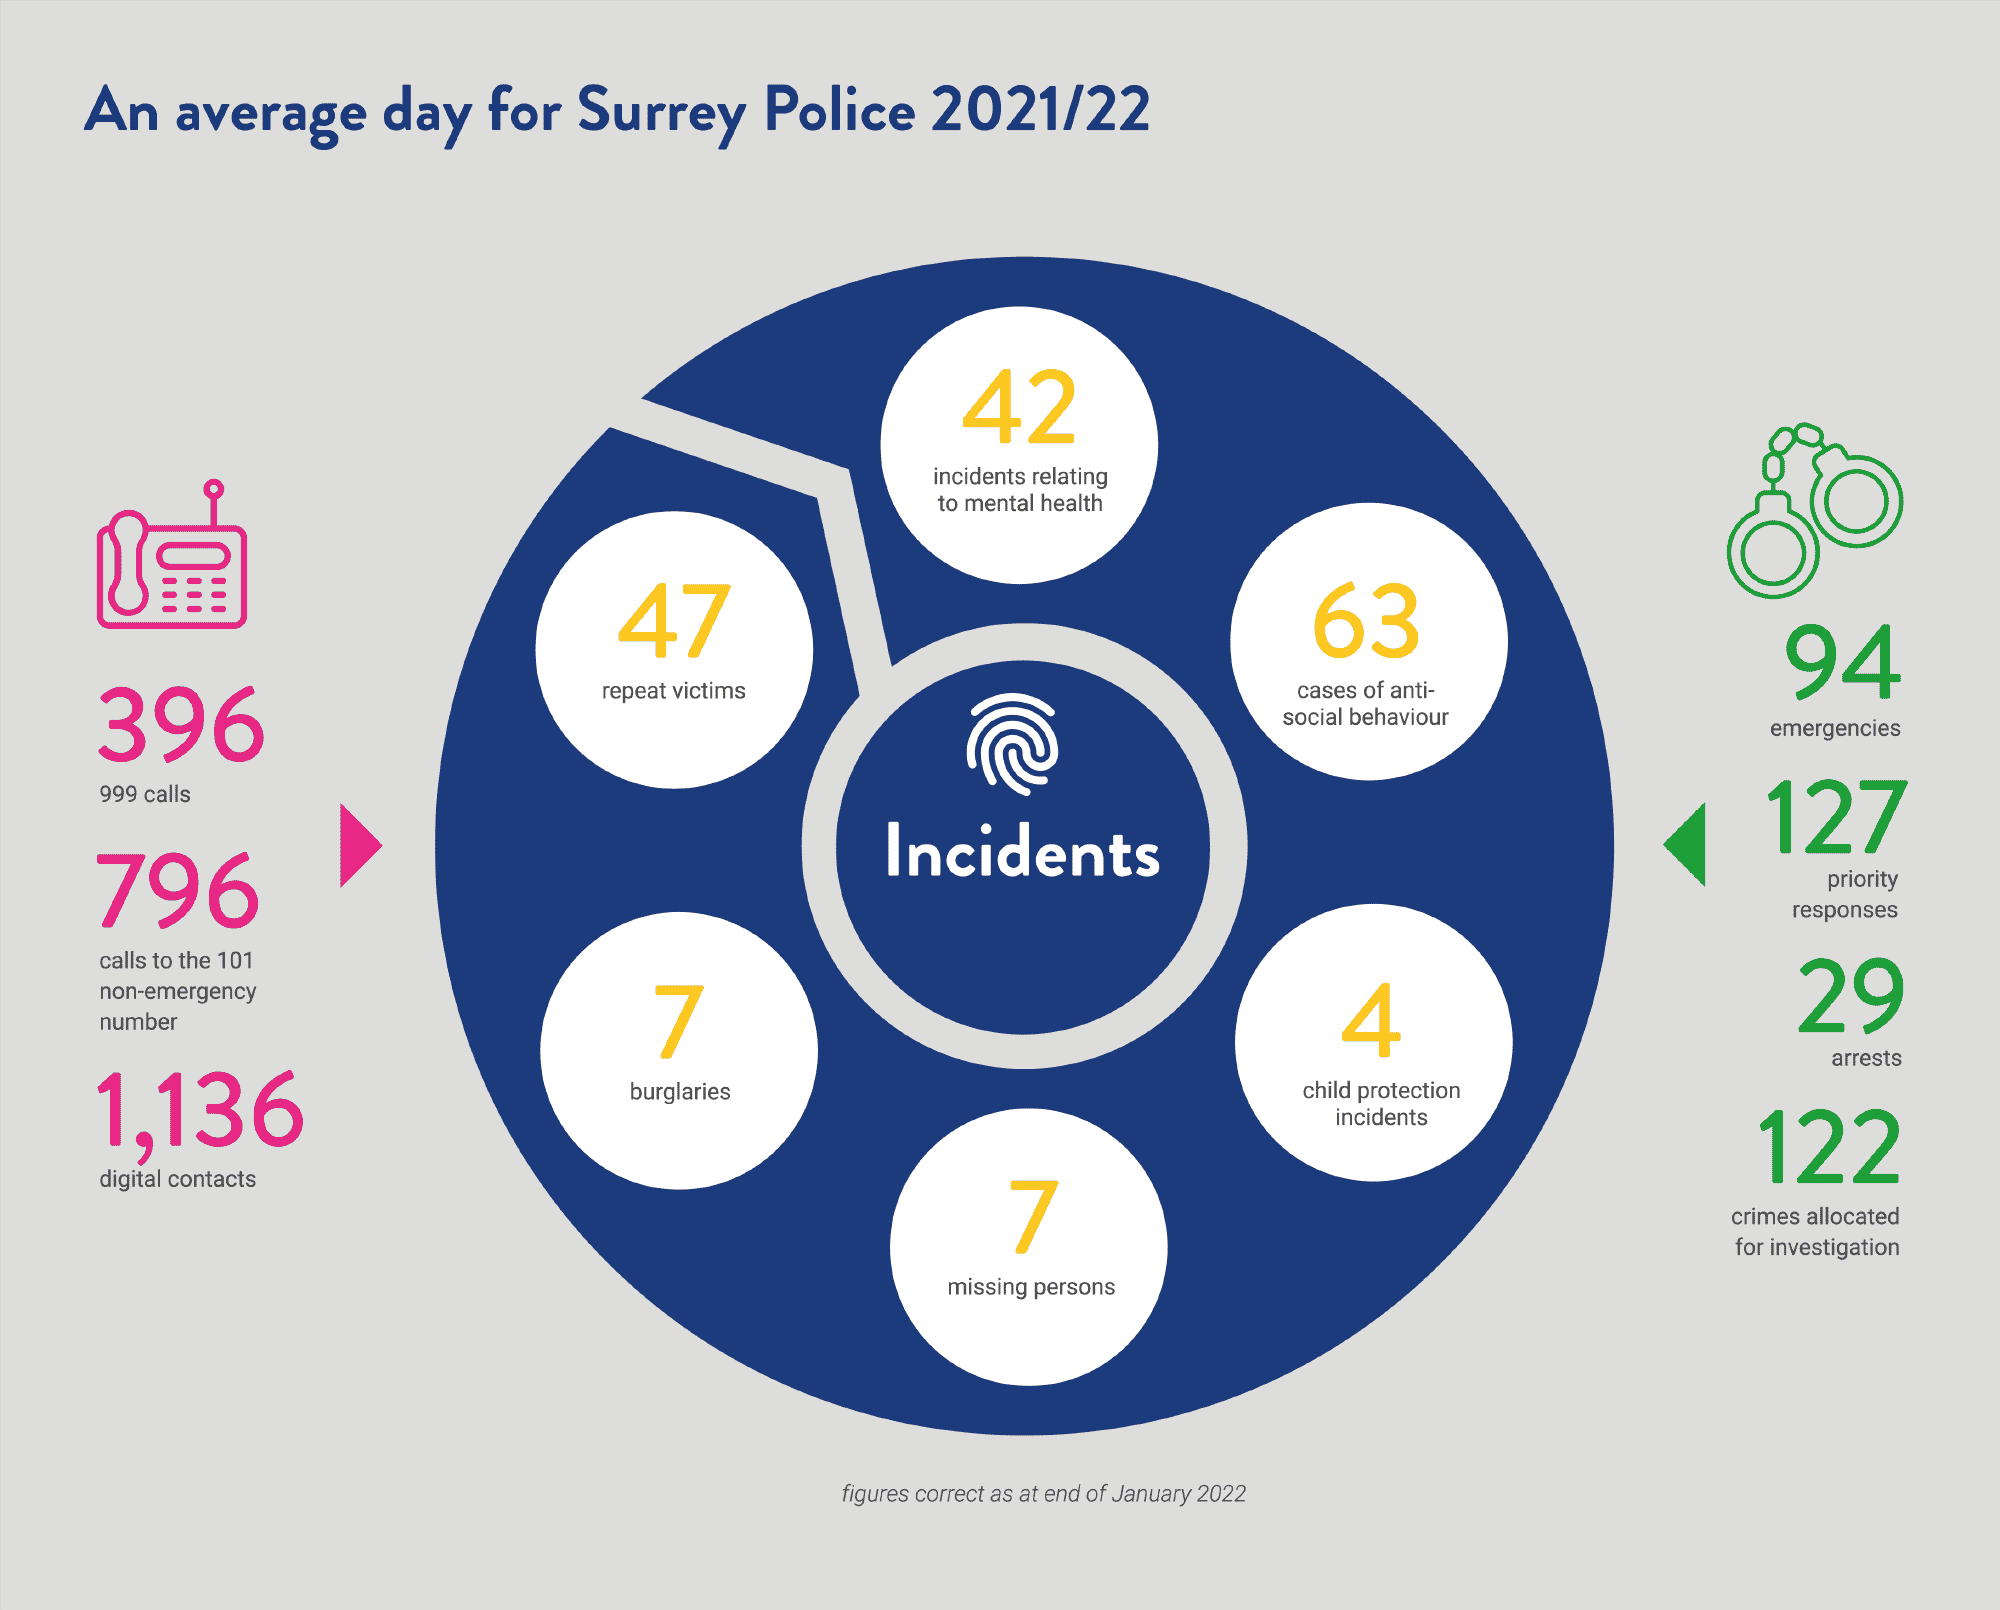 About Surrey Police